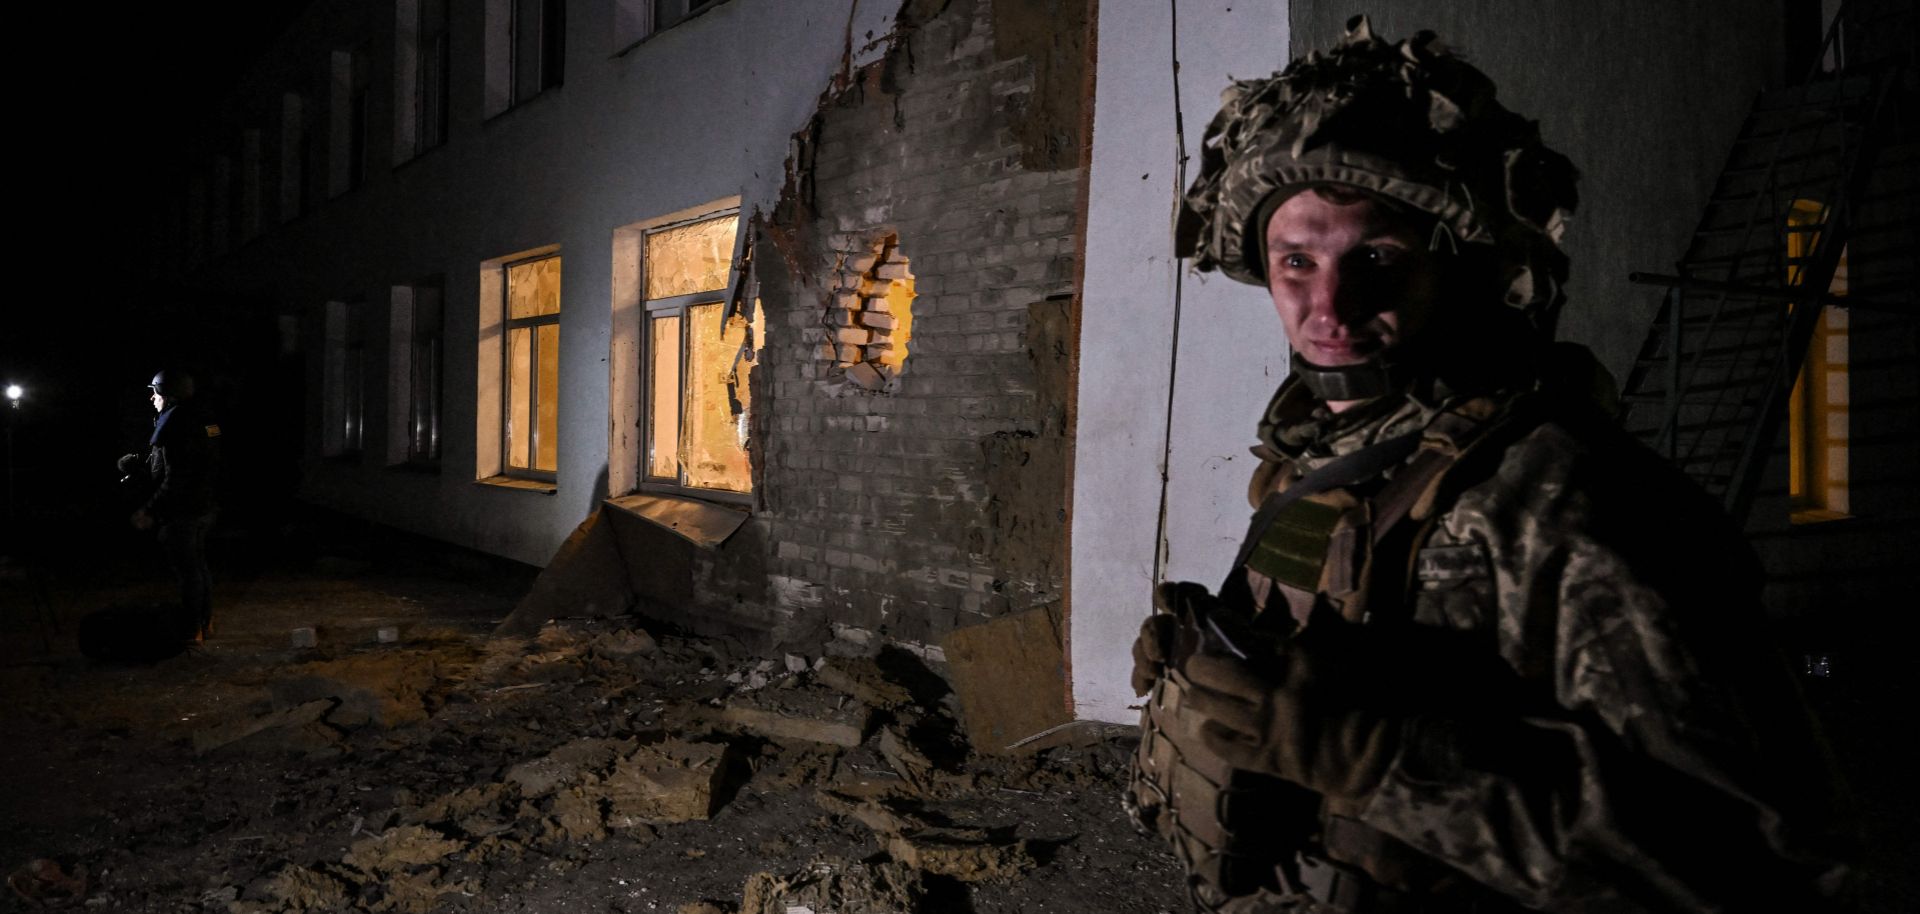 A Ukrainian soldier stands guard near debris after the reported shelling of a kindergarten in the settlement of Stanytsia Luhanska in eastern Ukraine on Feb. 17, 2022. 